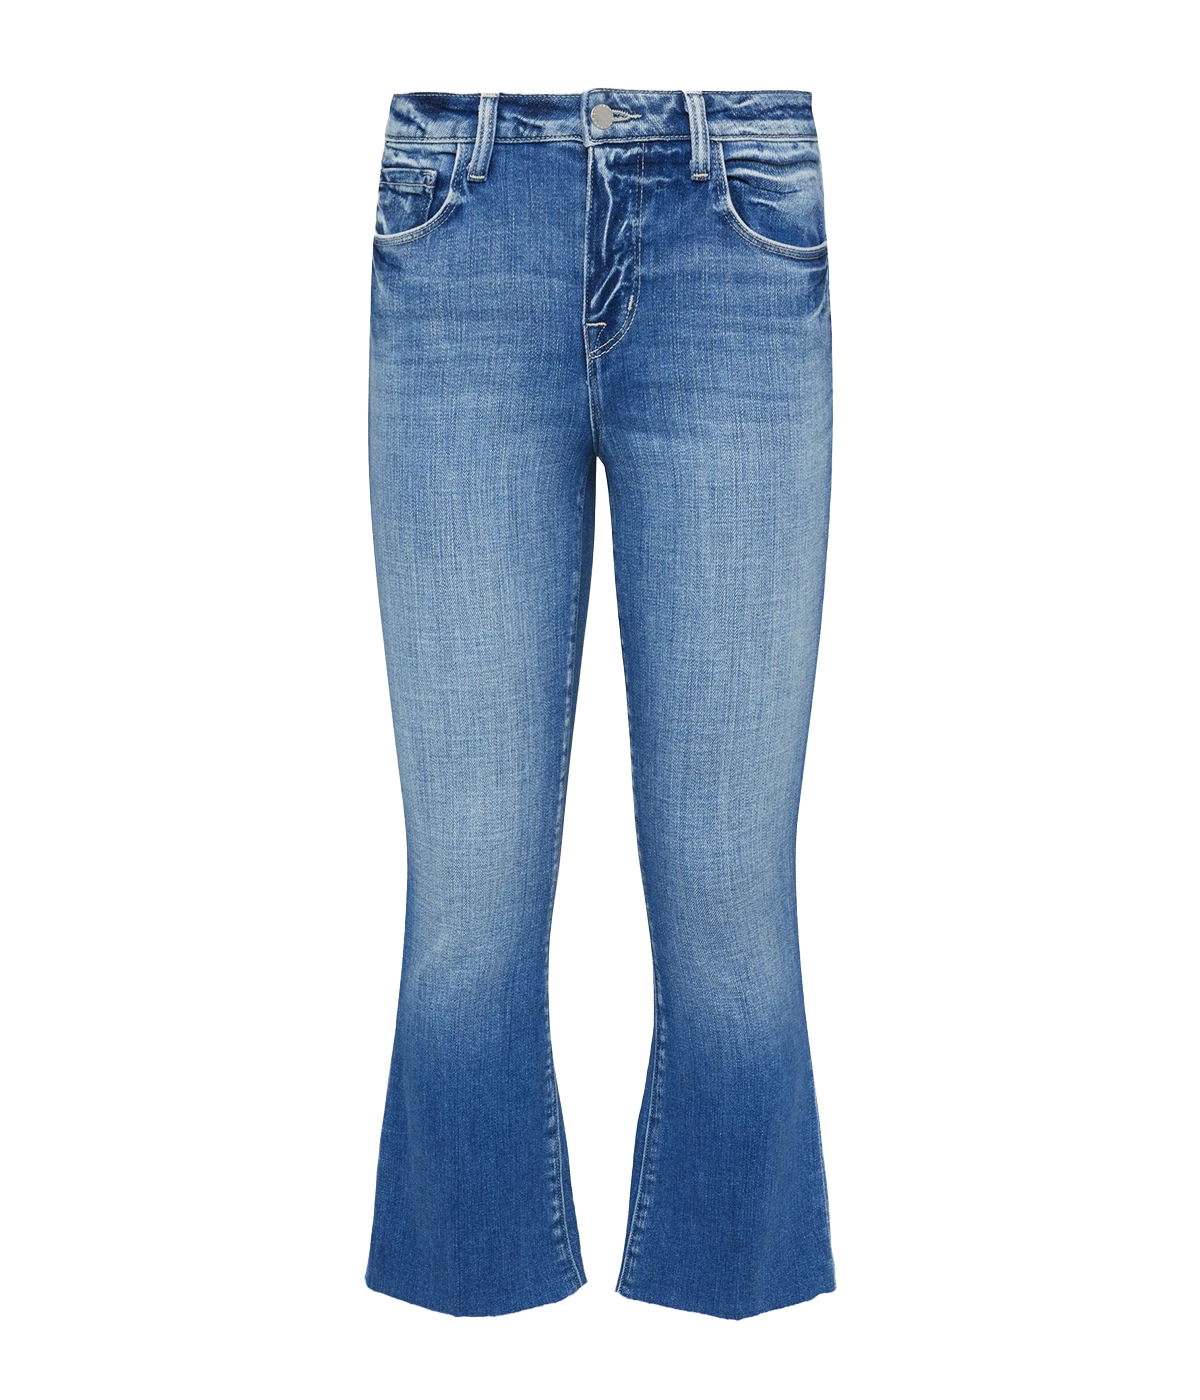 cropped and flared jean by L'agence in.a medium wash denim